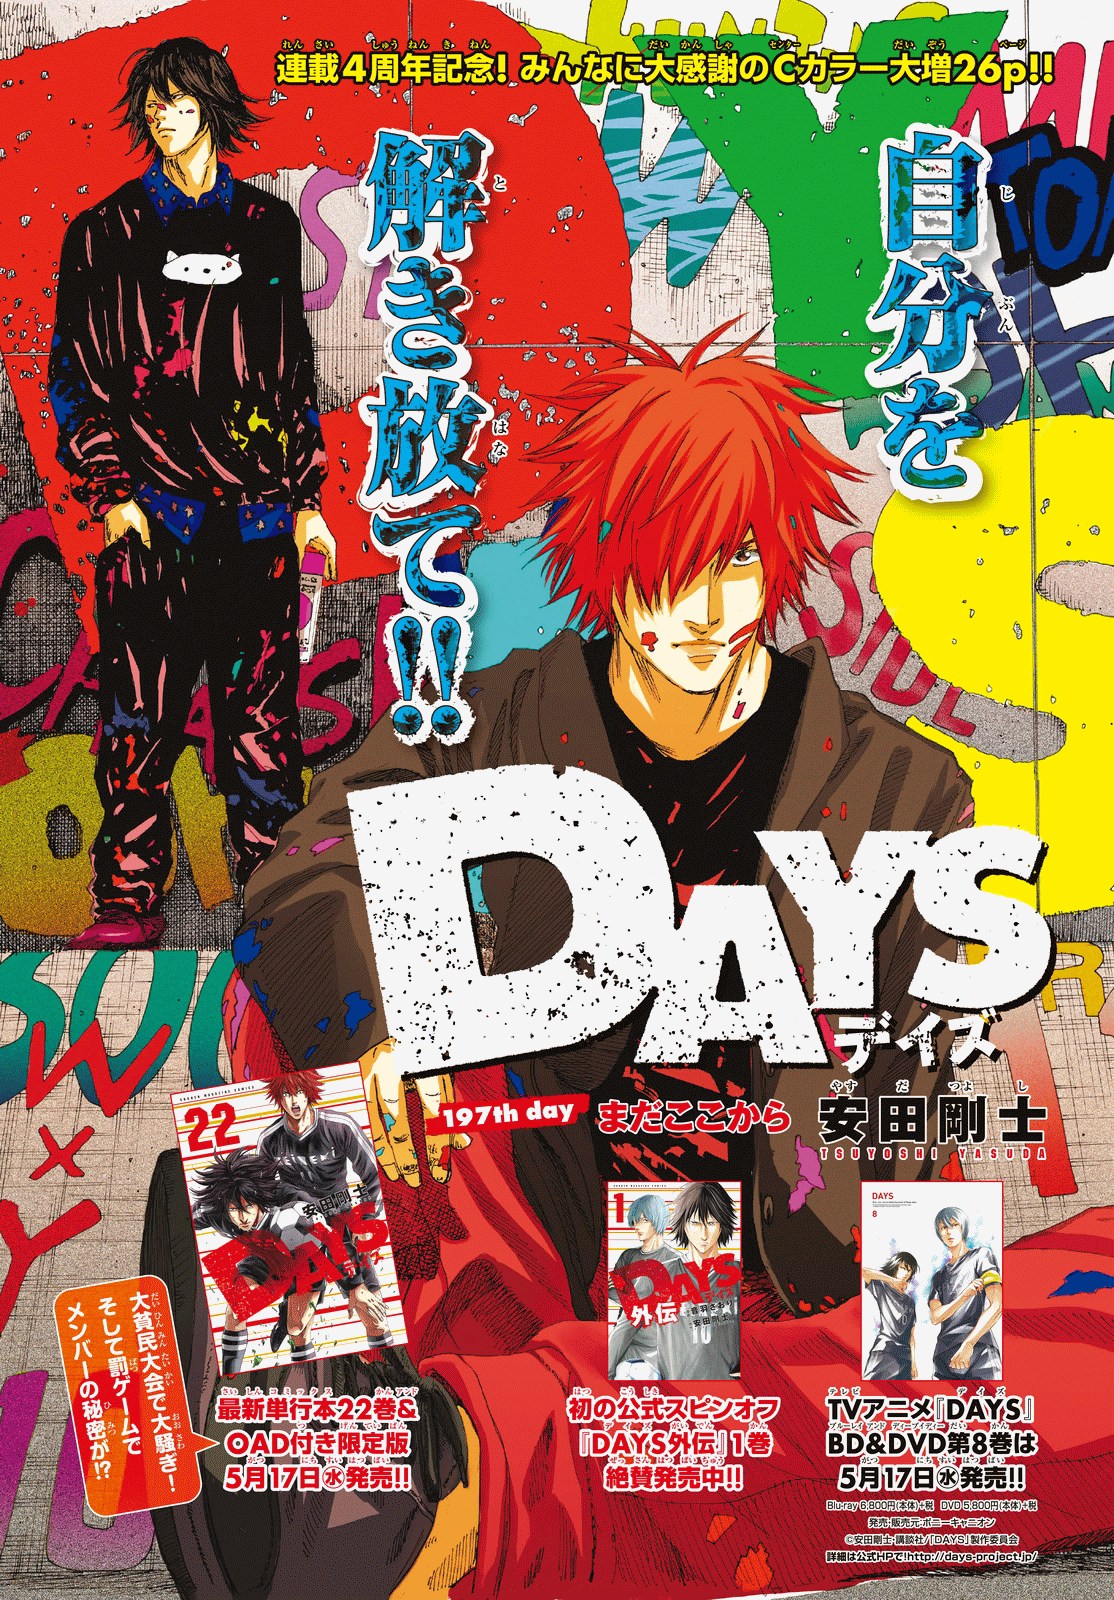 Days Vol. 23 Ch. 197 We Still Have Hereafter